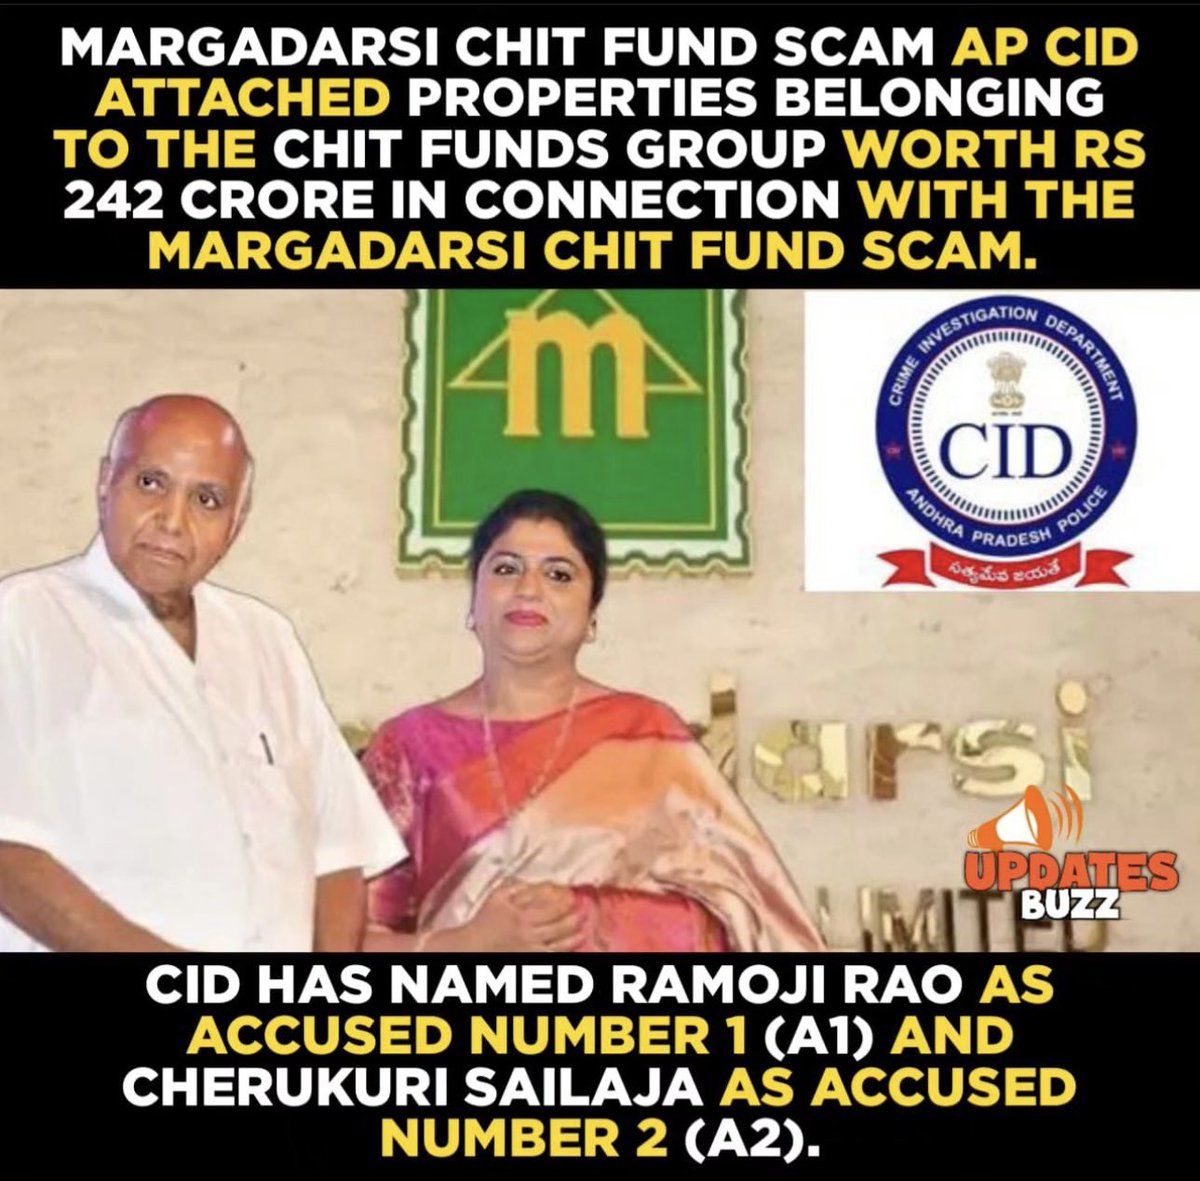 #AndhraPradesh #CID attached properties belonging to margadarsi chit fund group worth 242 crores That are in connection with Chit Fund Scam !
#CMYSJagan #Enadu #RamojiRao